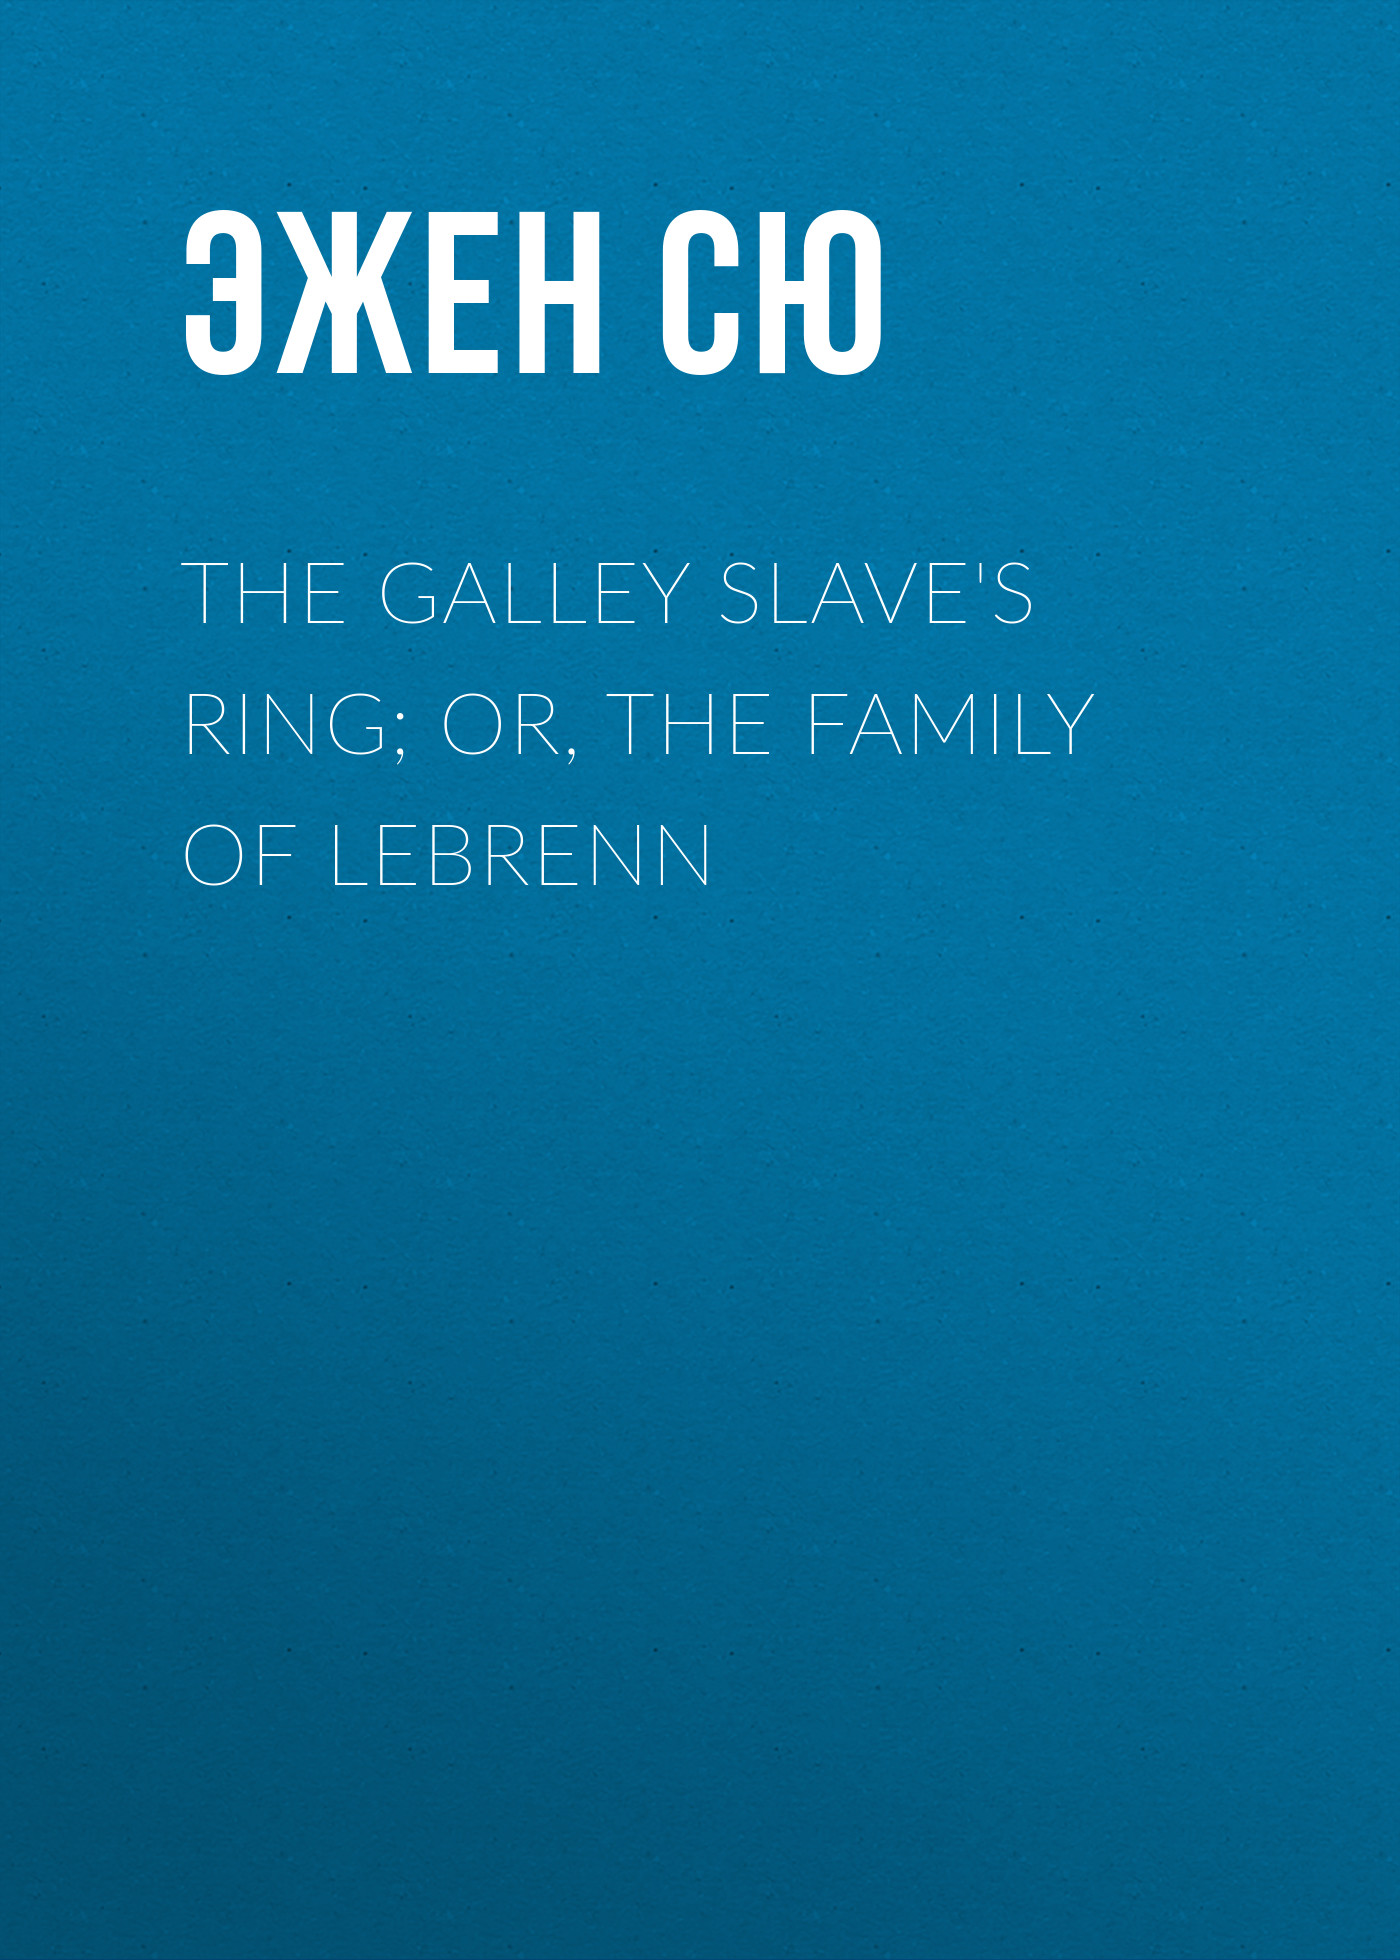 The Galley Slave's Ring; or, The Family of Lebrenn